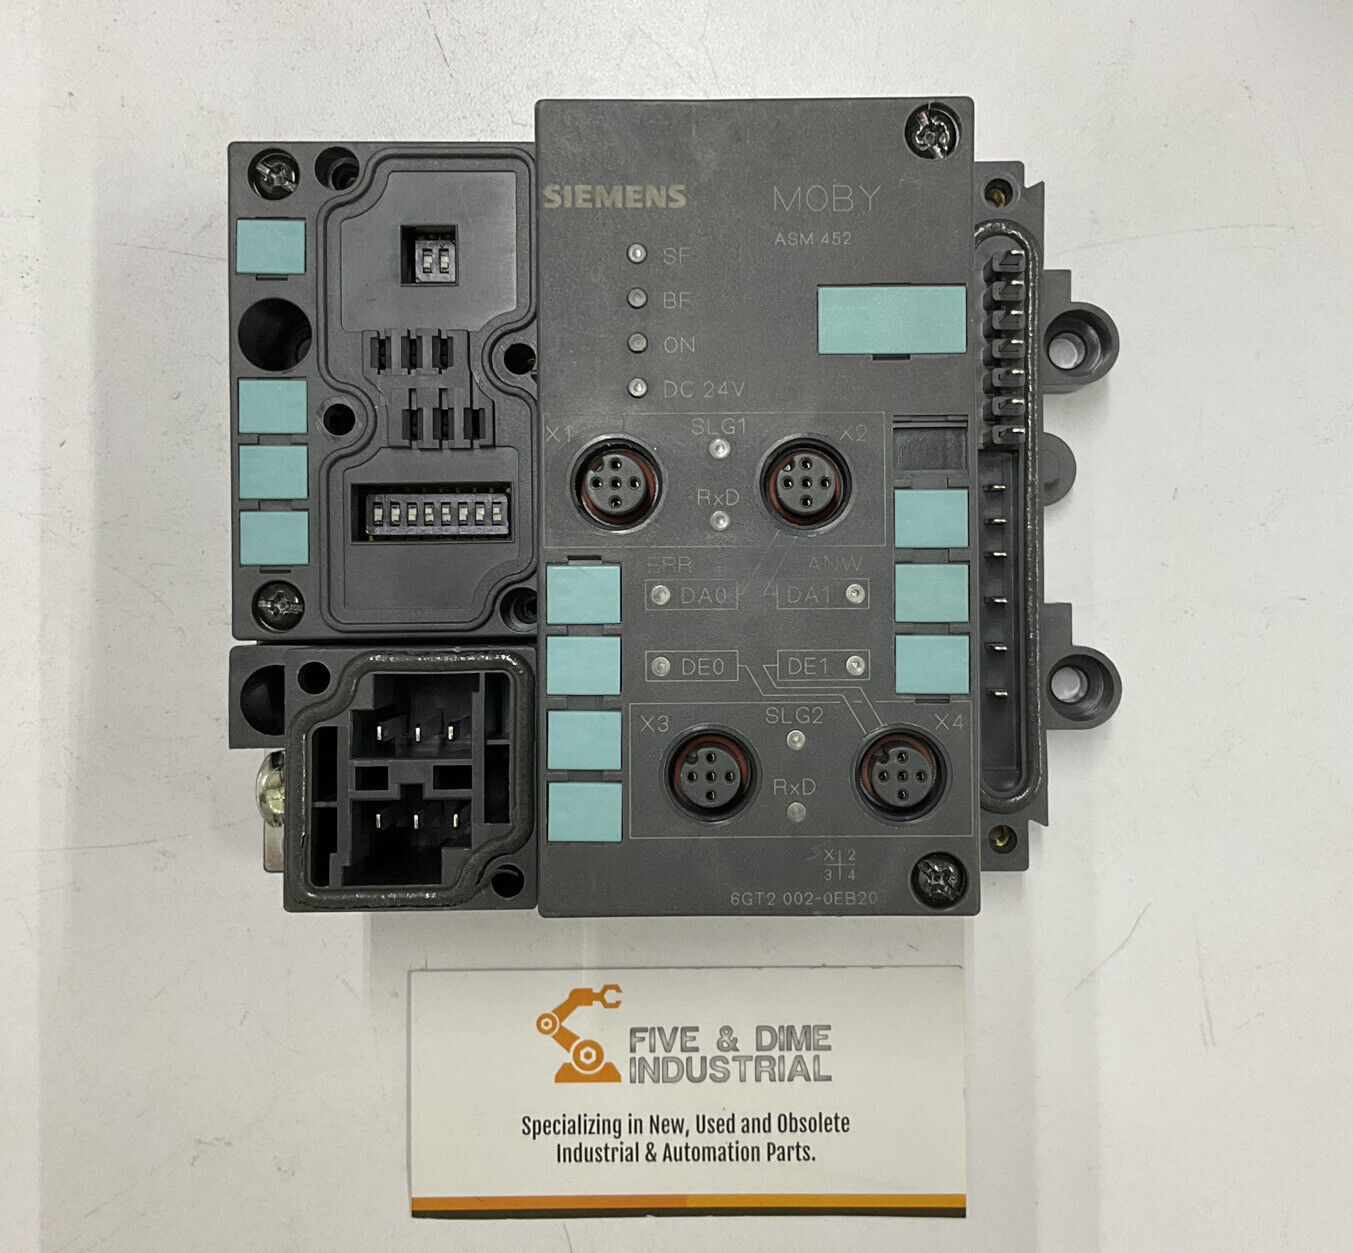 Siemens 6GT2-002-OEB20 MOBY ASM 452 Module with Base (CL358)